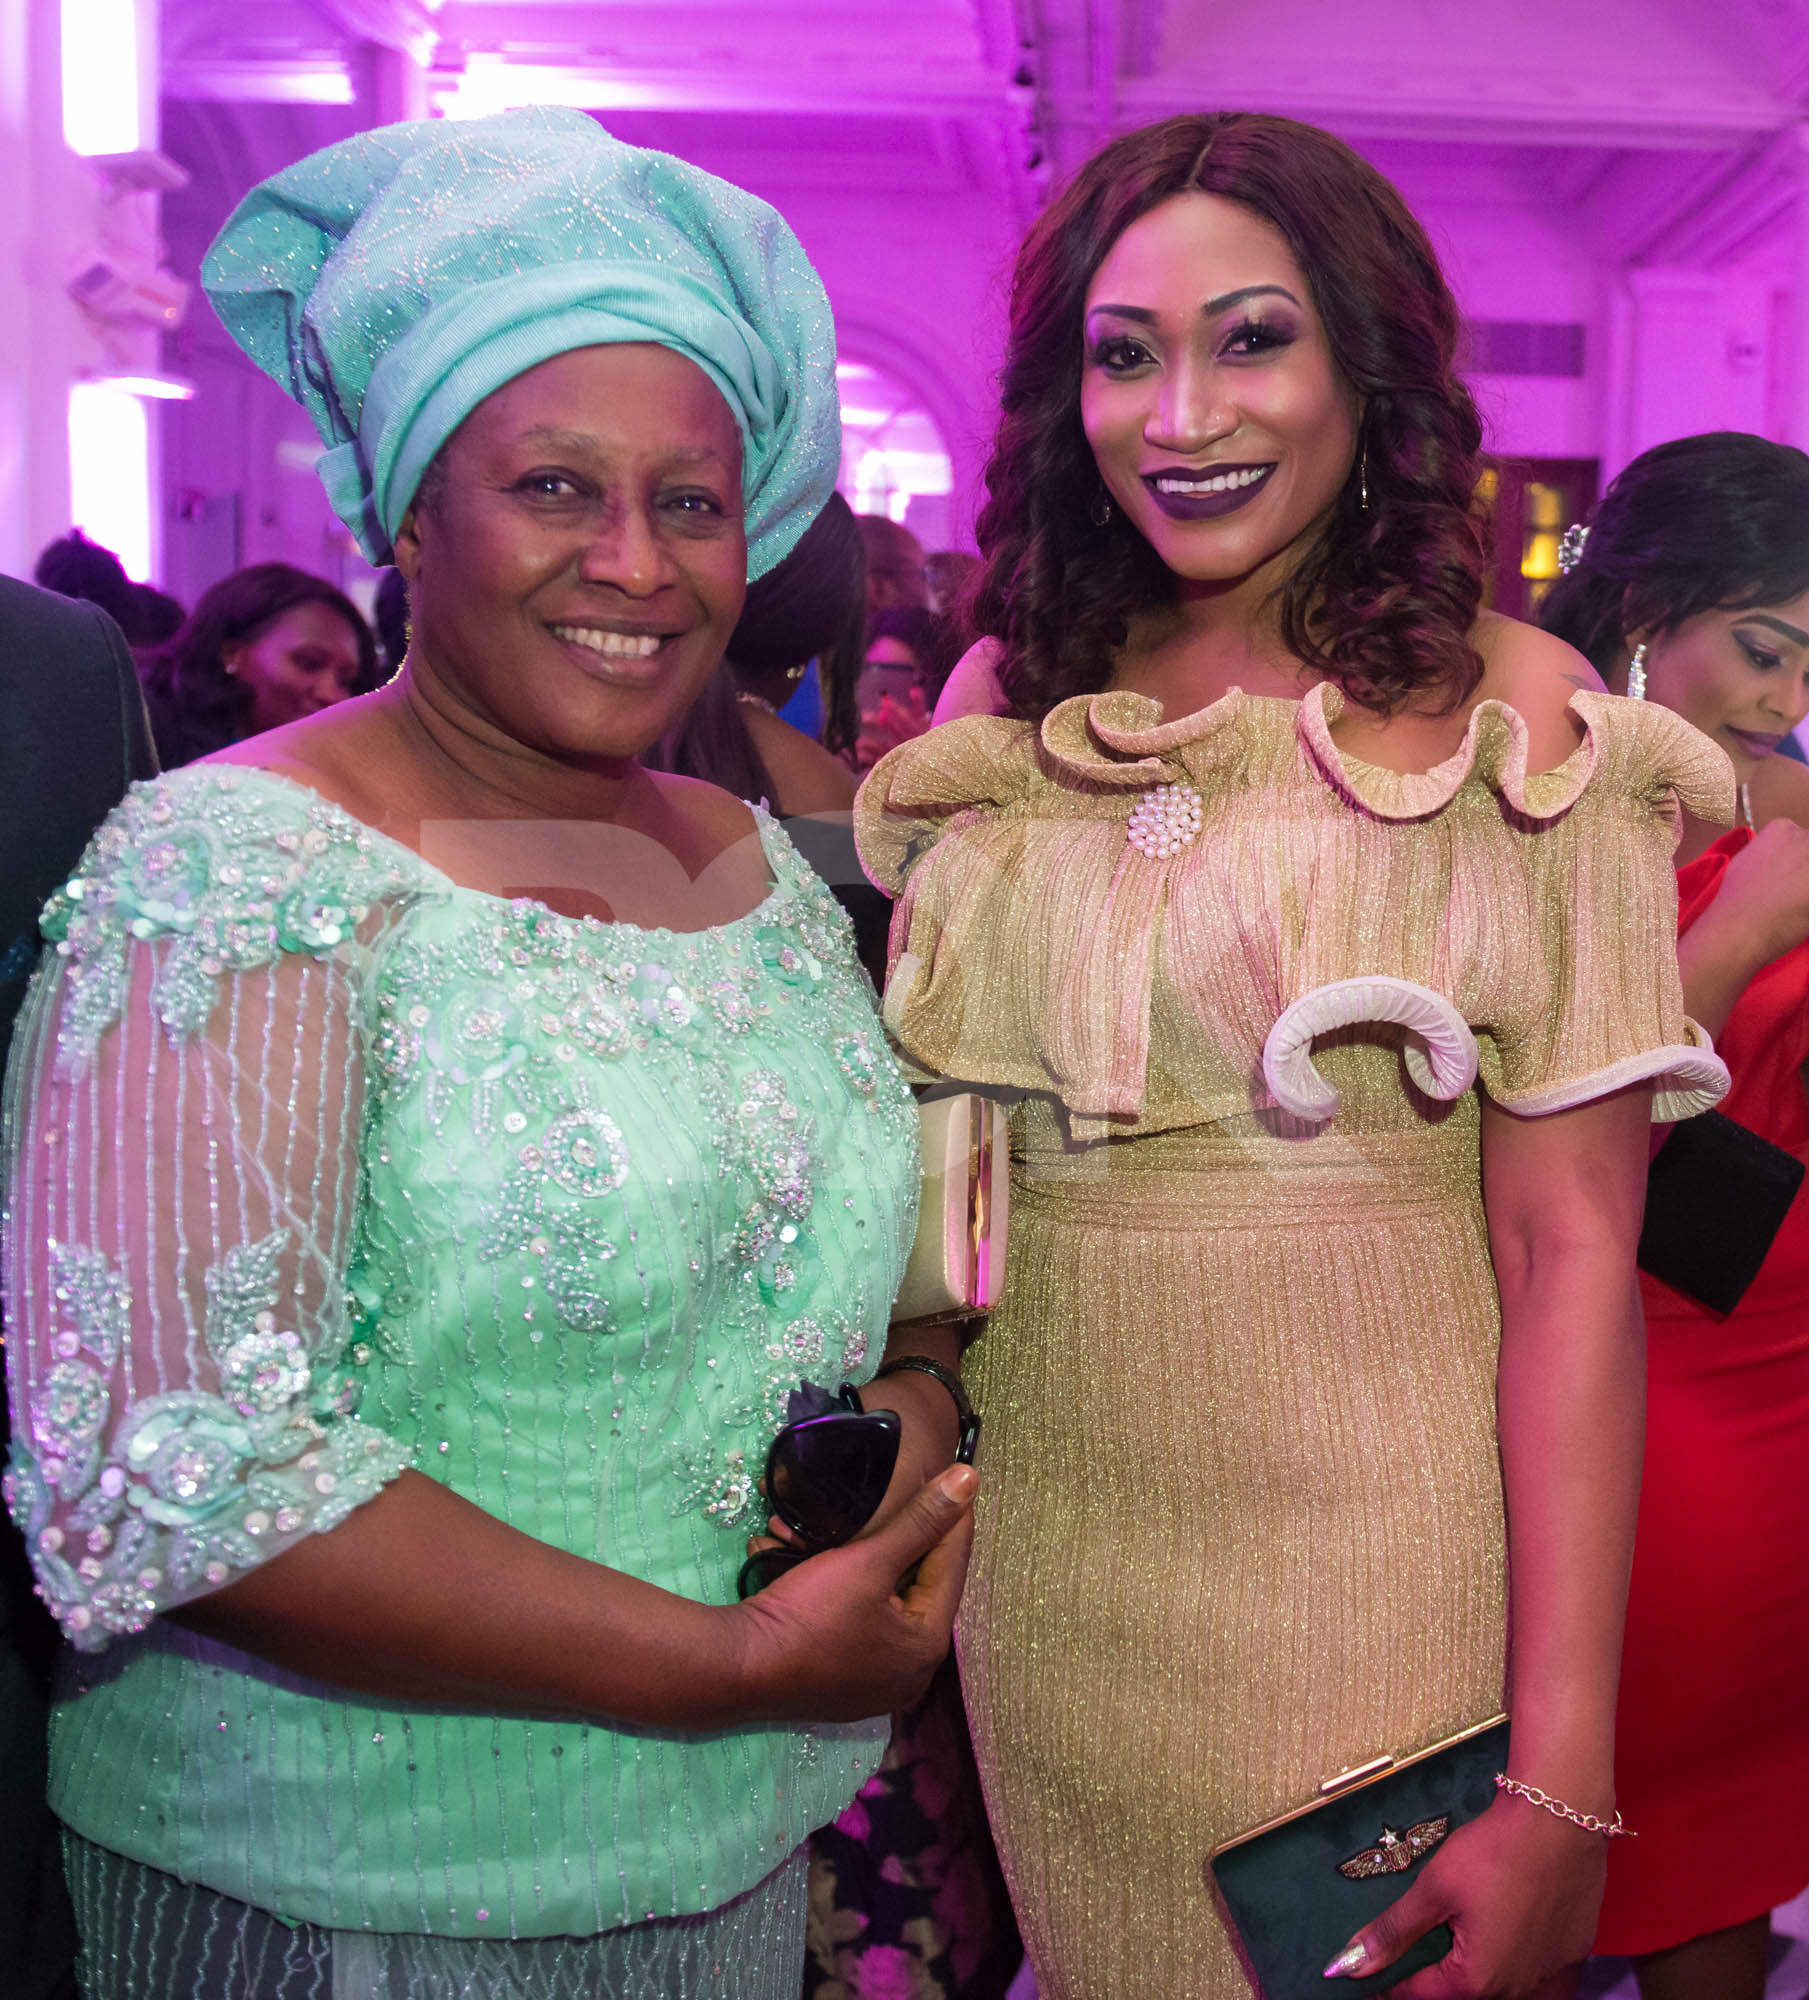 Next to Oge Okoye is Nollywood legend Patience Ozokwor. We were humbled to be in her presence.